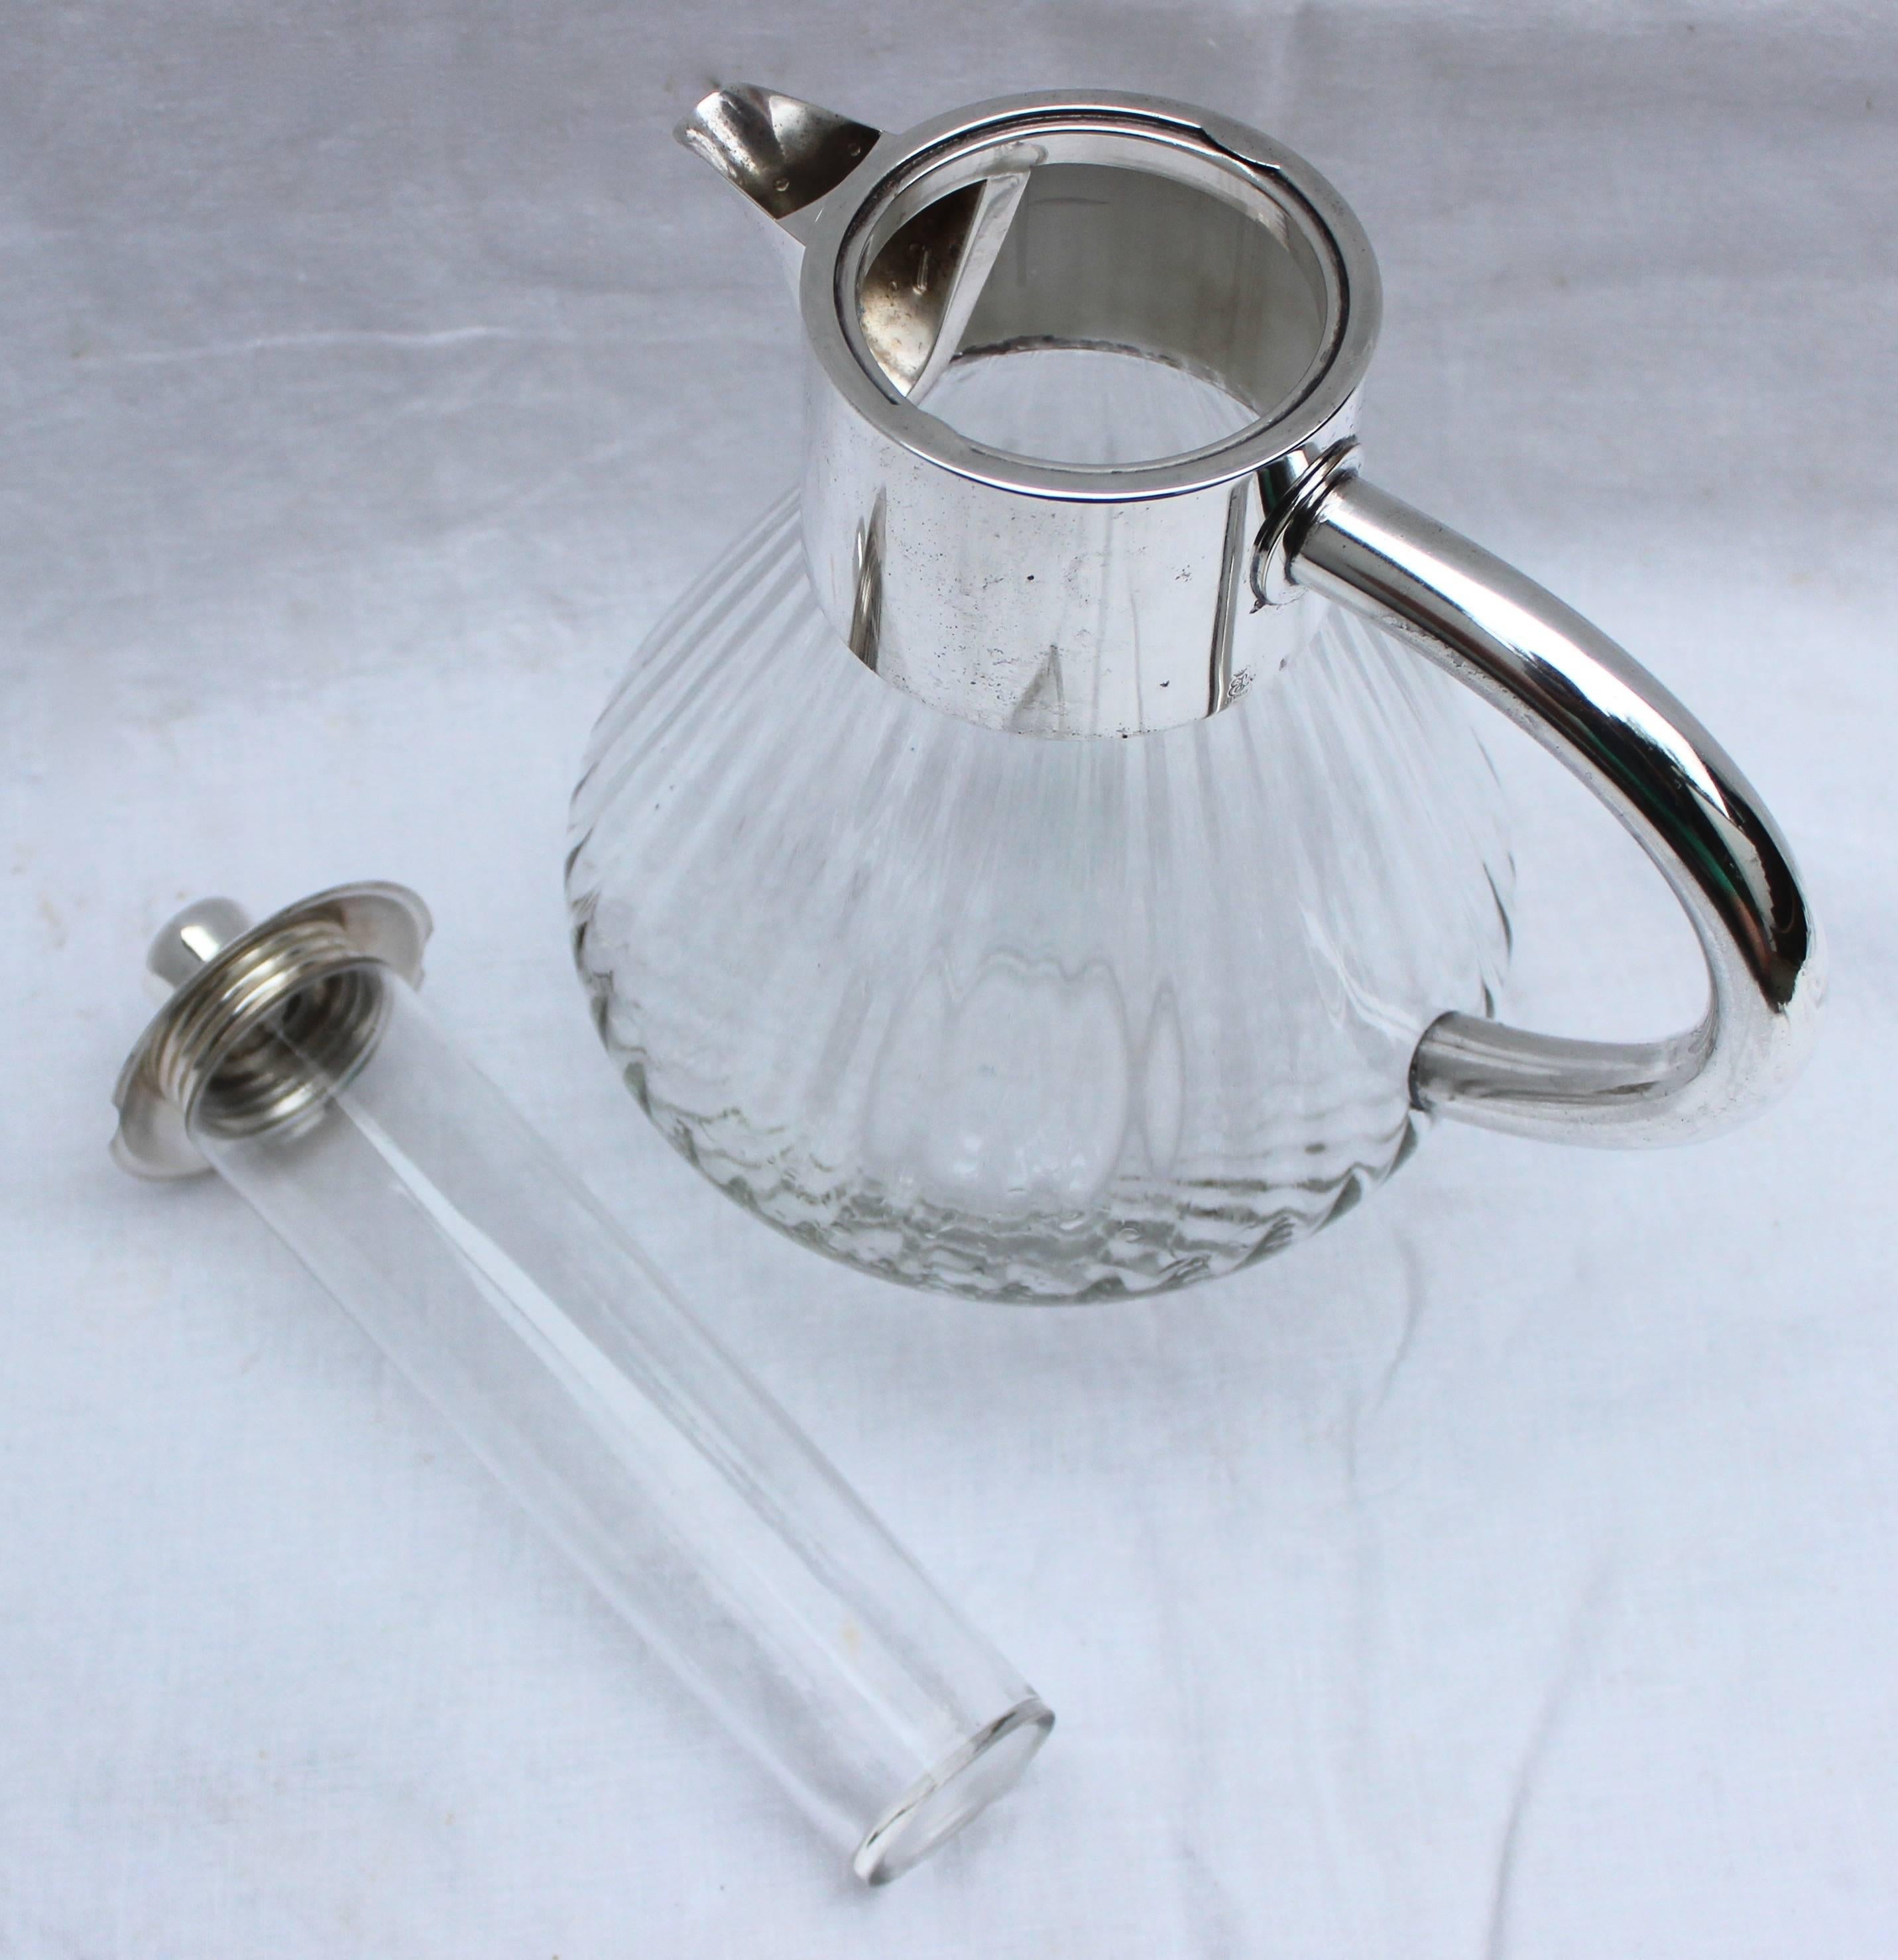 20th Century German Silver Plate and Glass Pitcher by WMF